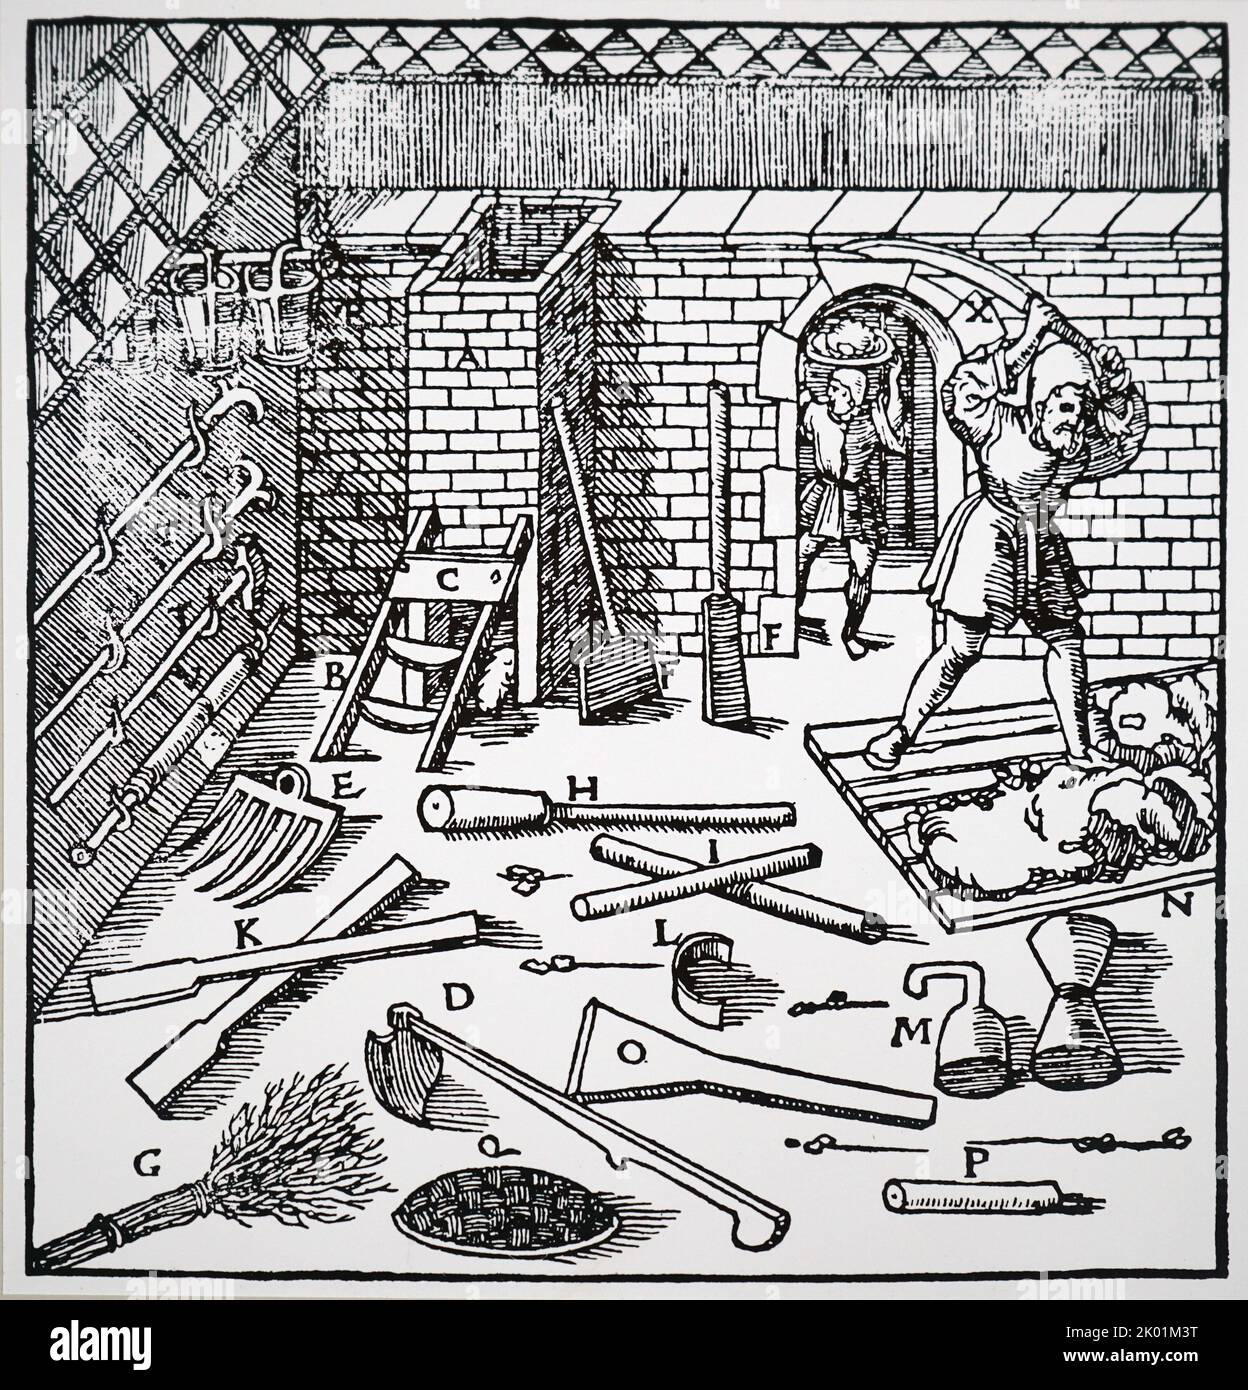 The smelting of ores, gold, silver, copper or lead. Workman beating clay to make lute with which to line furnace before smelting. Basle, 1556. Stock Photo